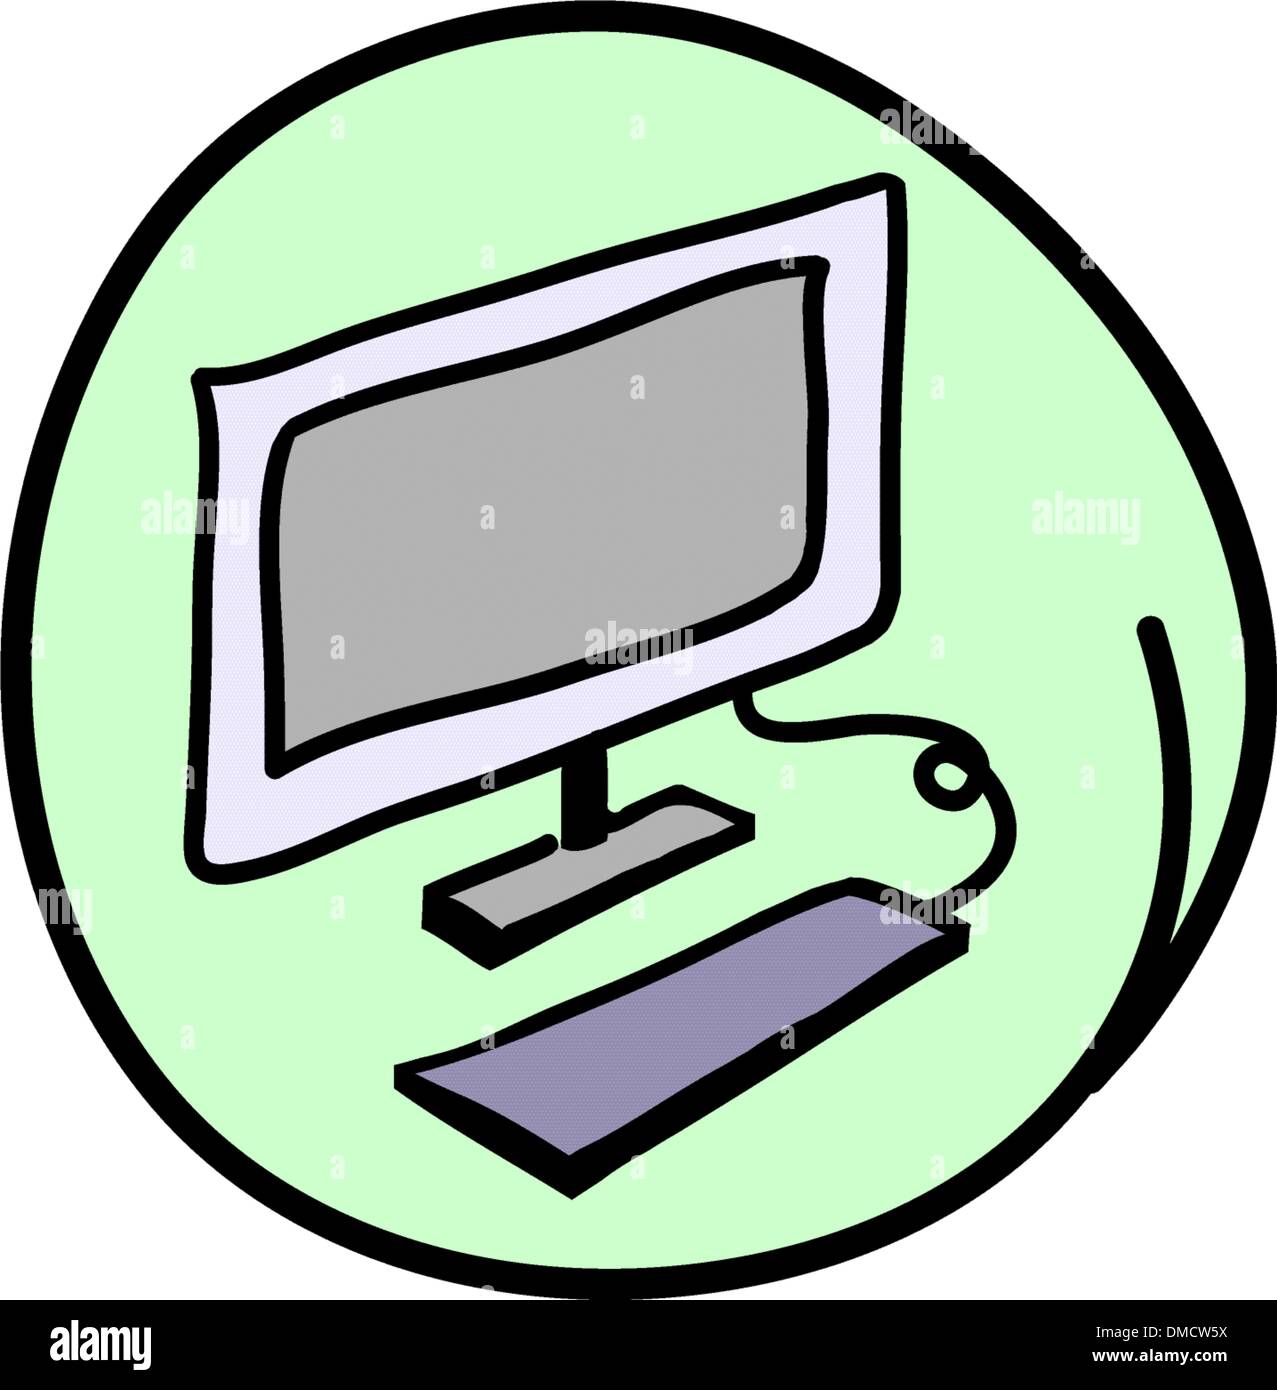 The Computer Workstation on Round Green Background Stock Vector